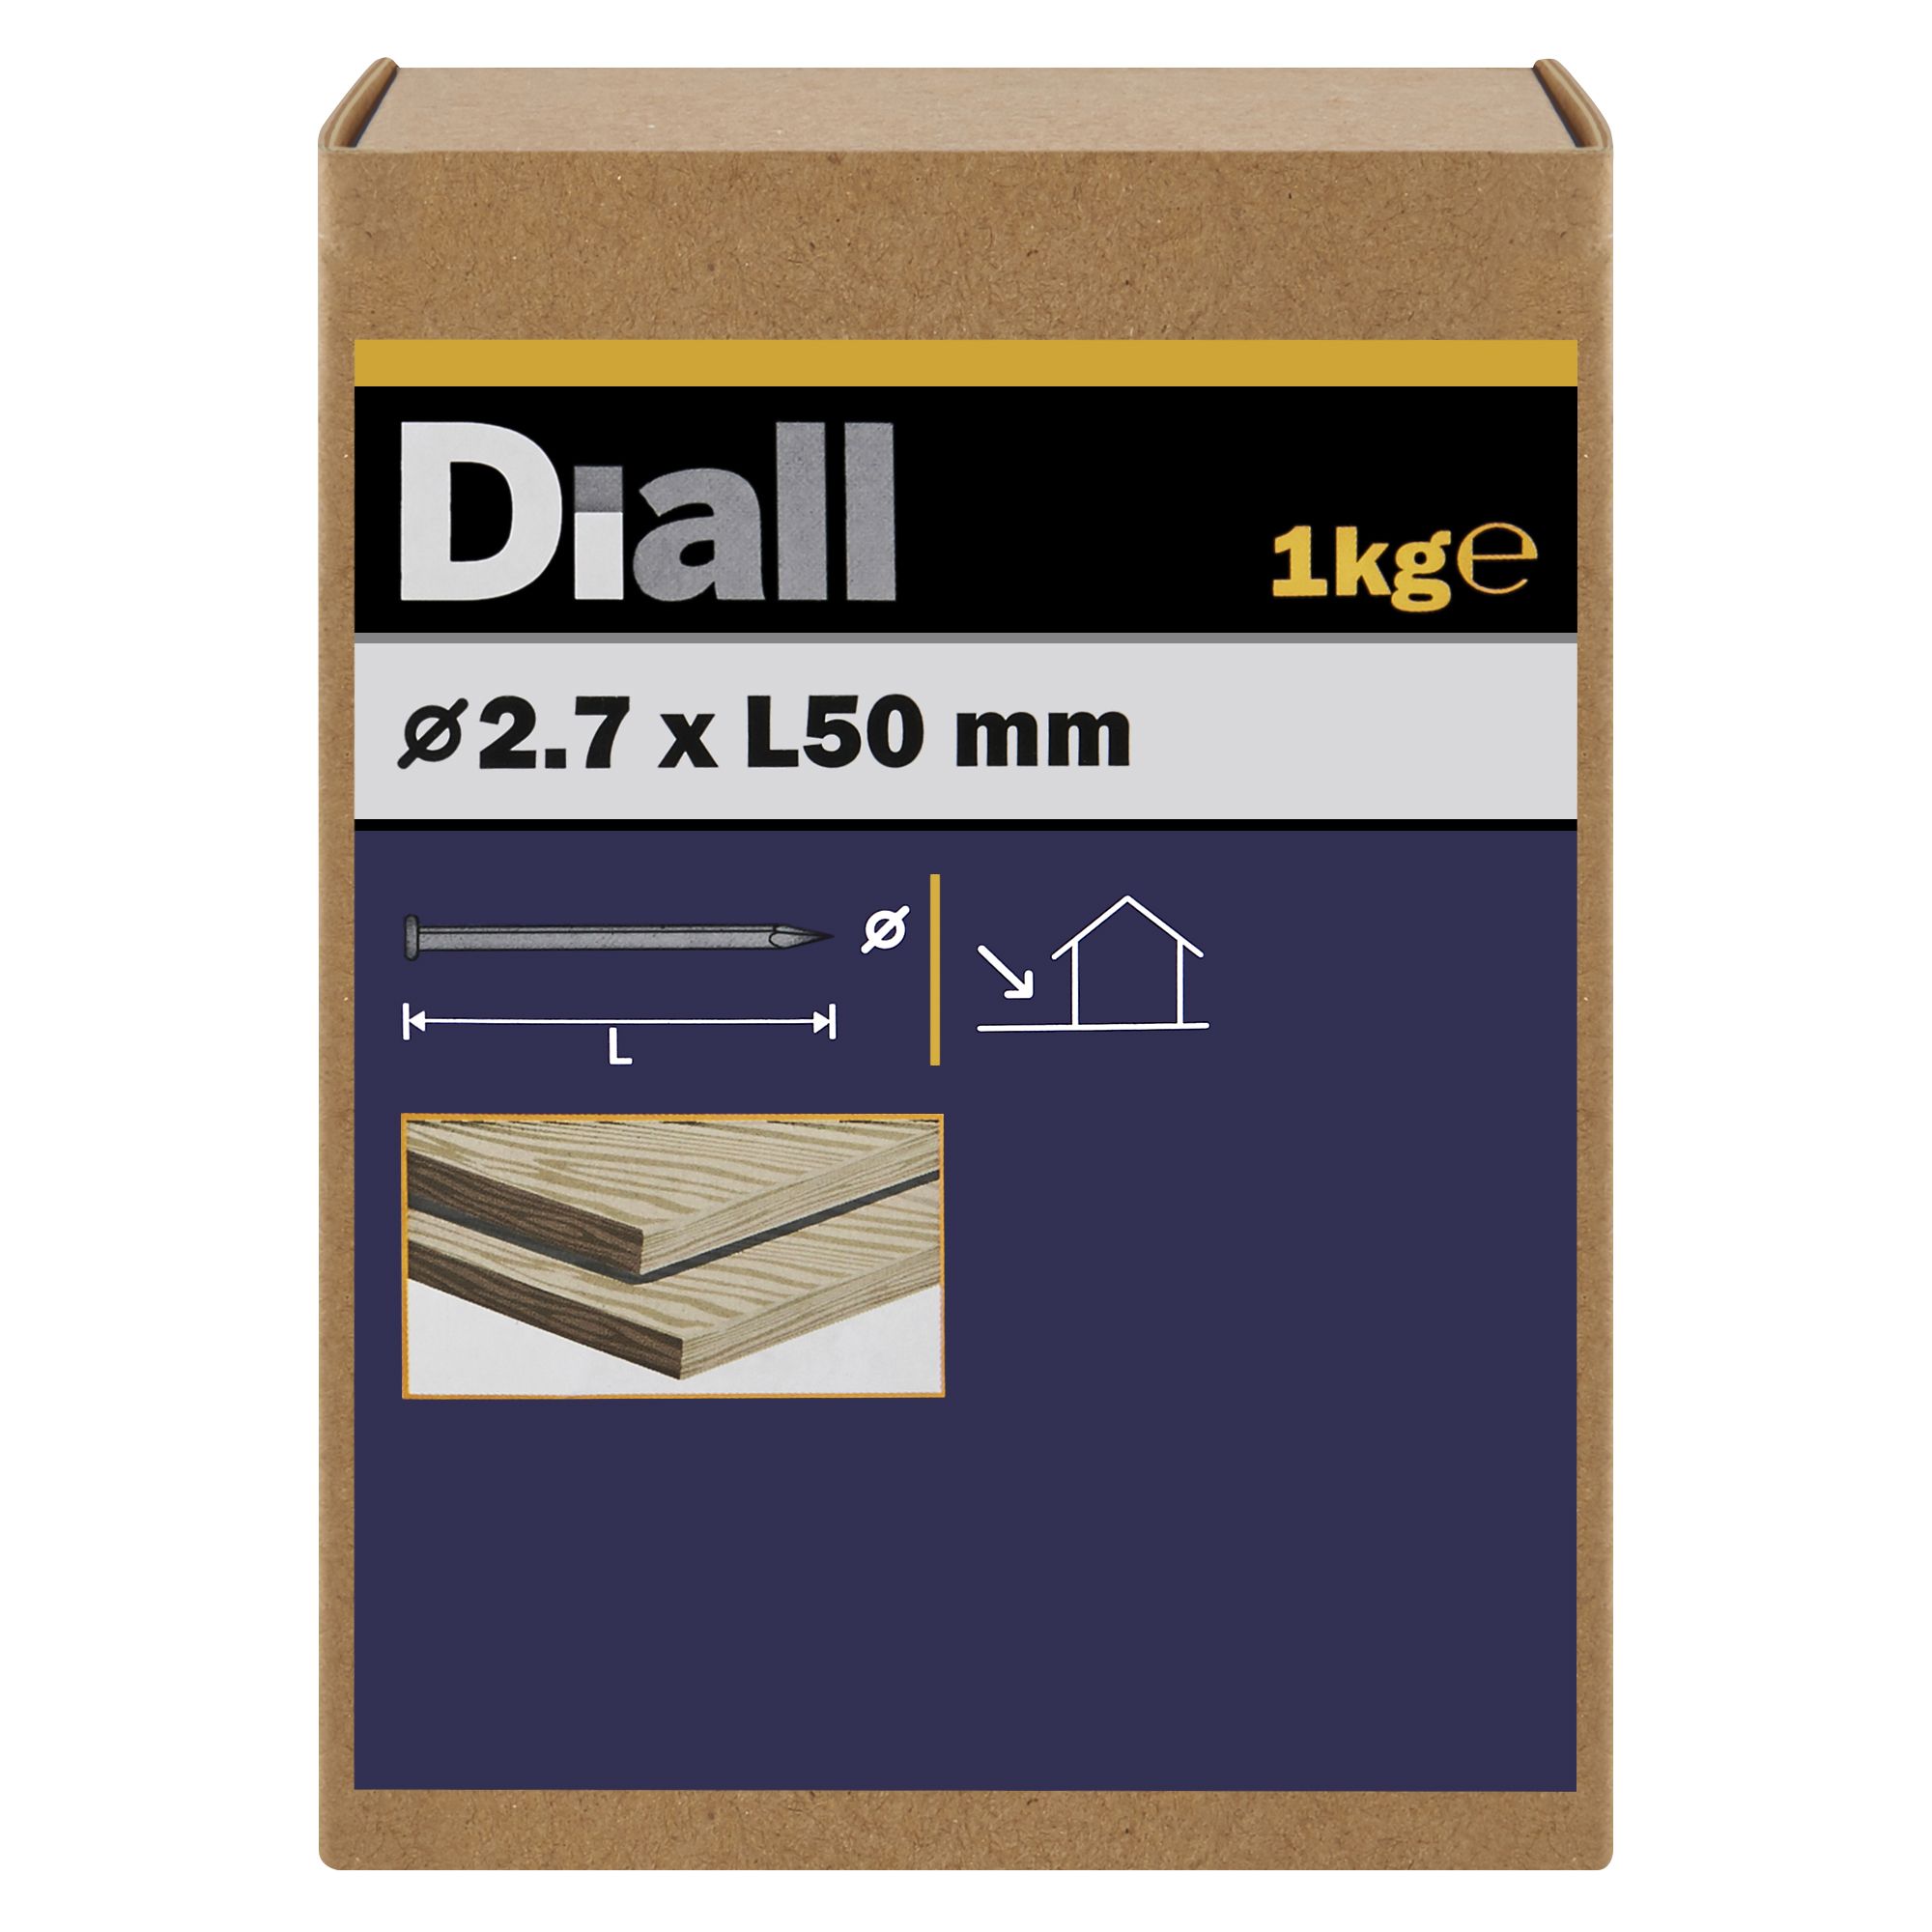 Diall Galvanised Round wire nail (L)50mm (Dia)2.7mm 1kg